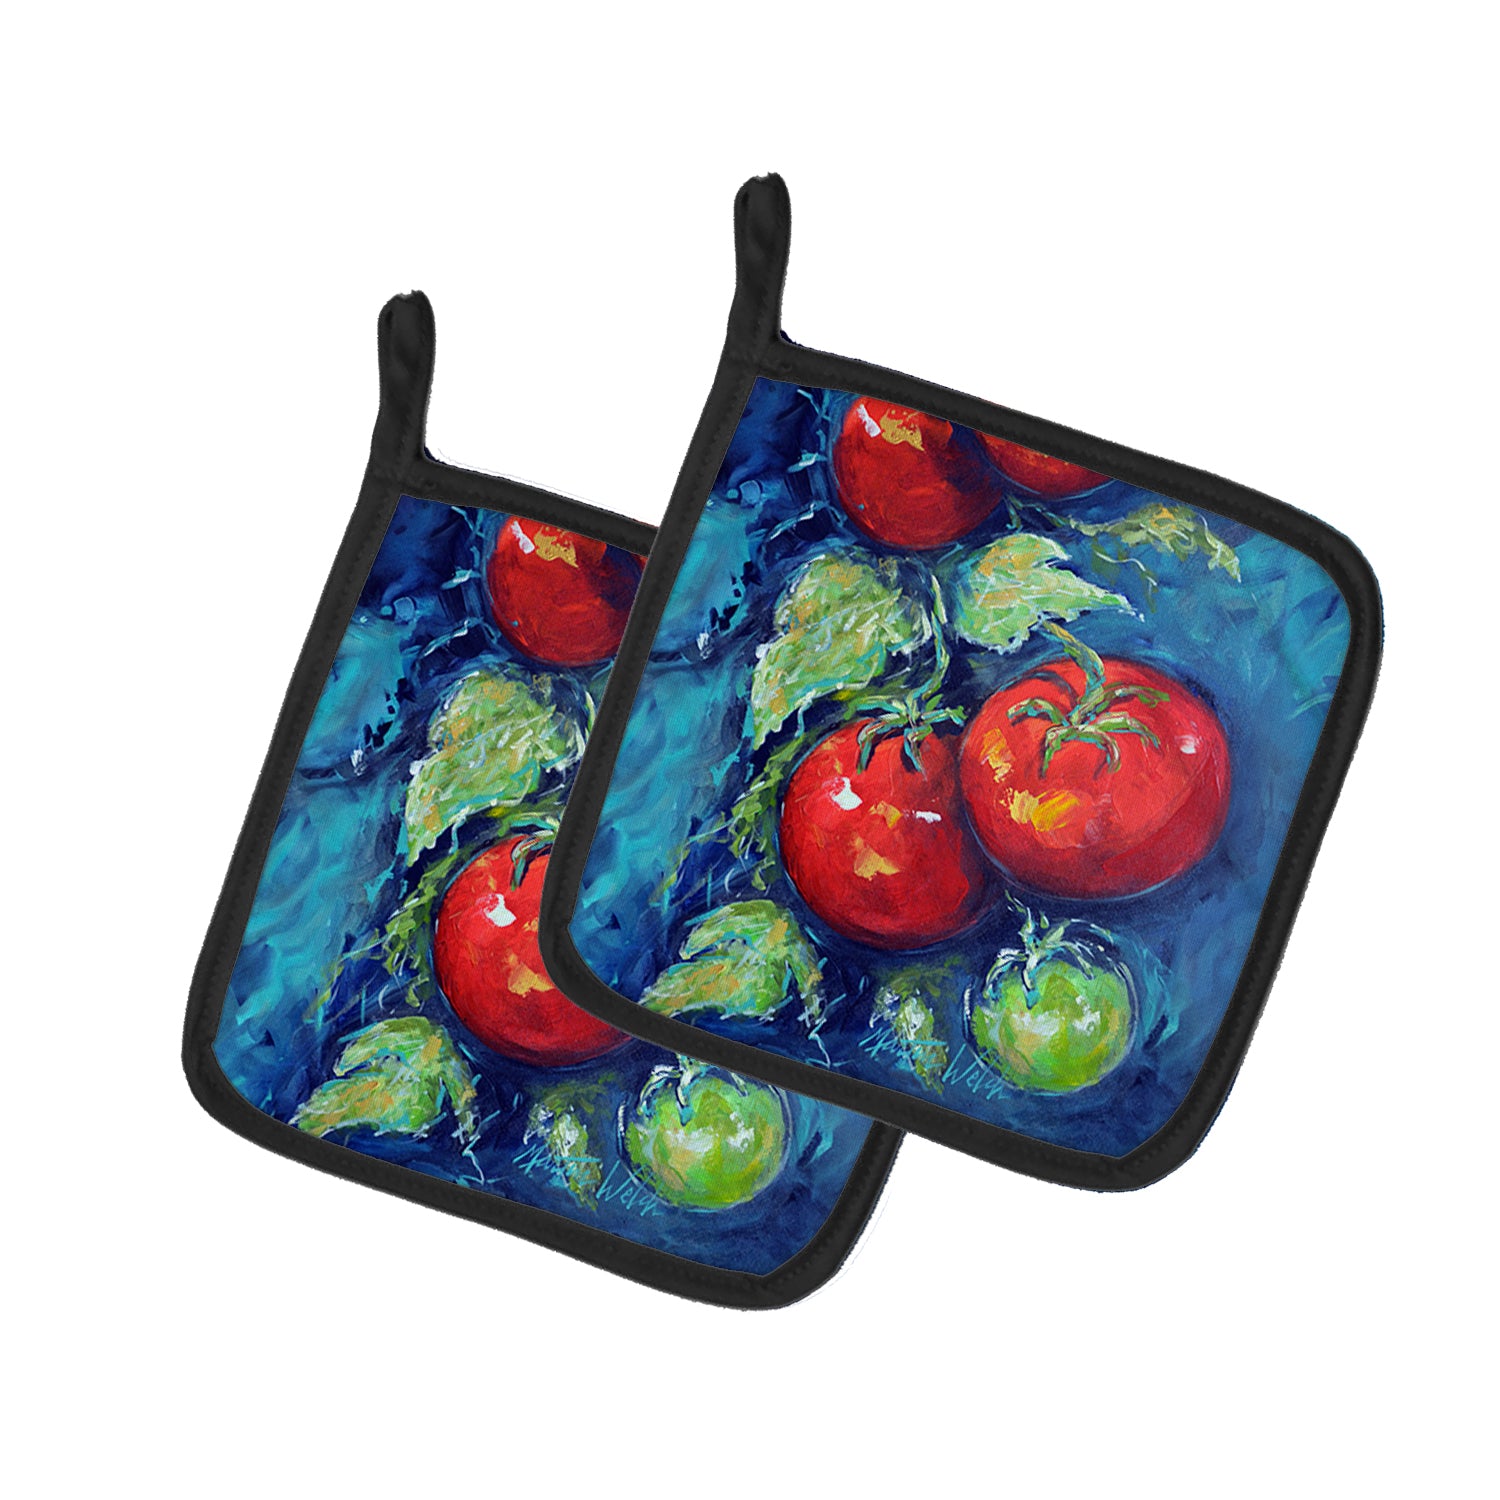 Buy this Creole Tomatoes Pair of Pot Holders